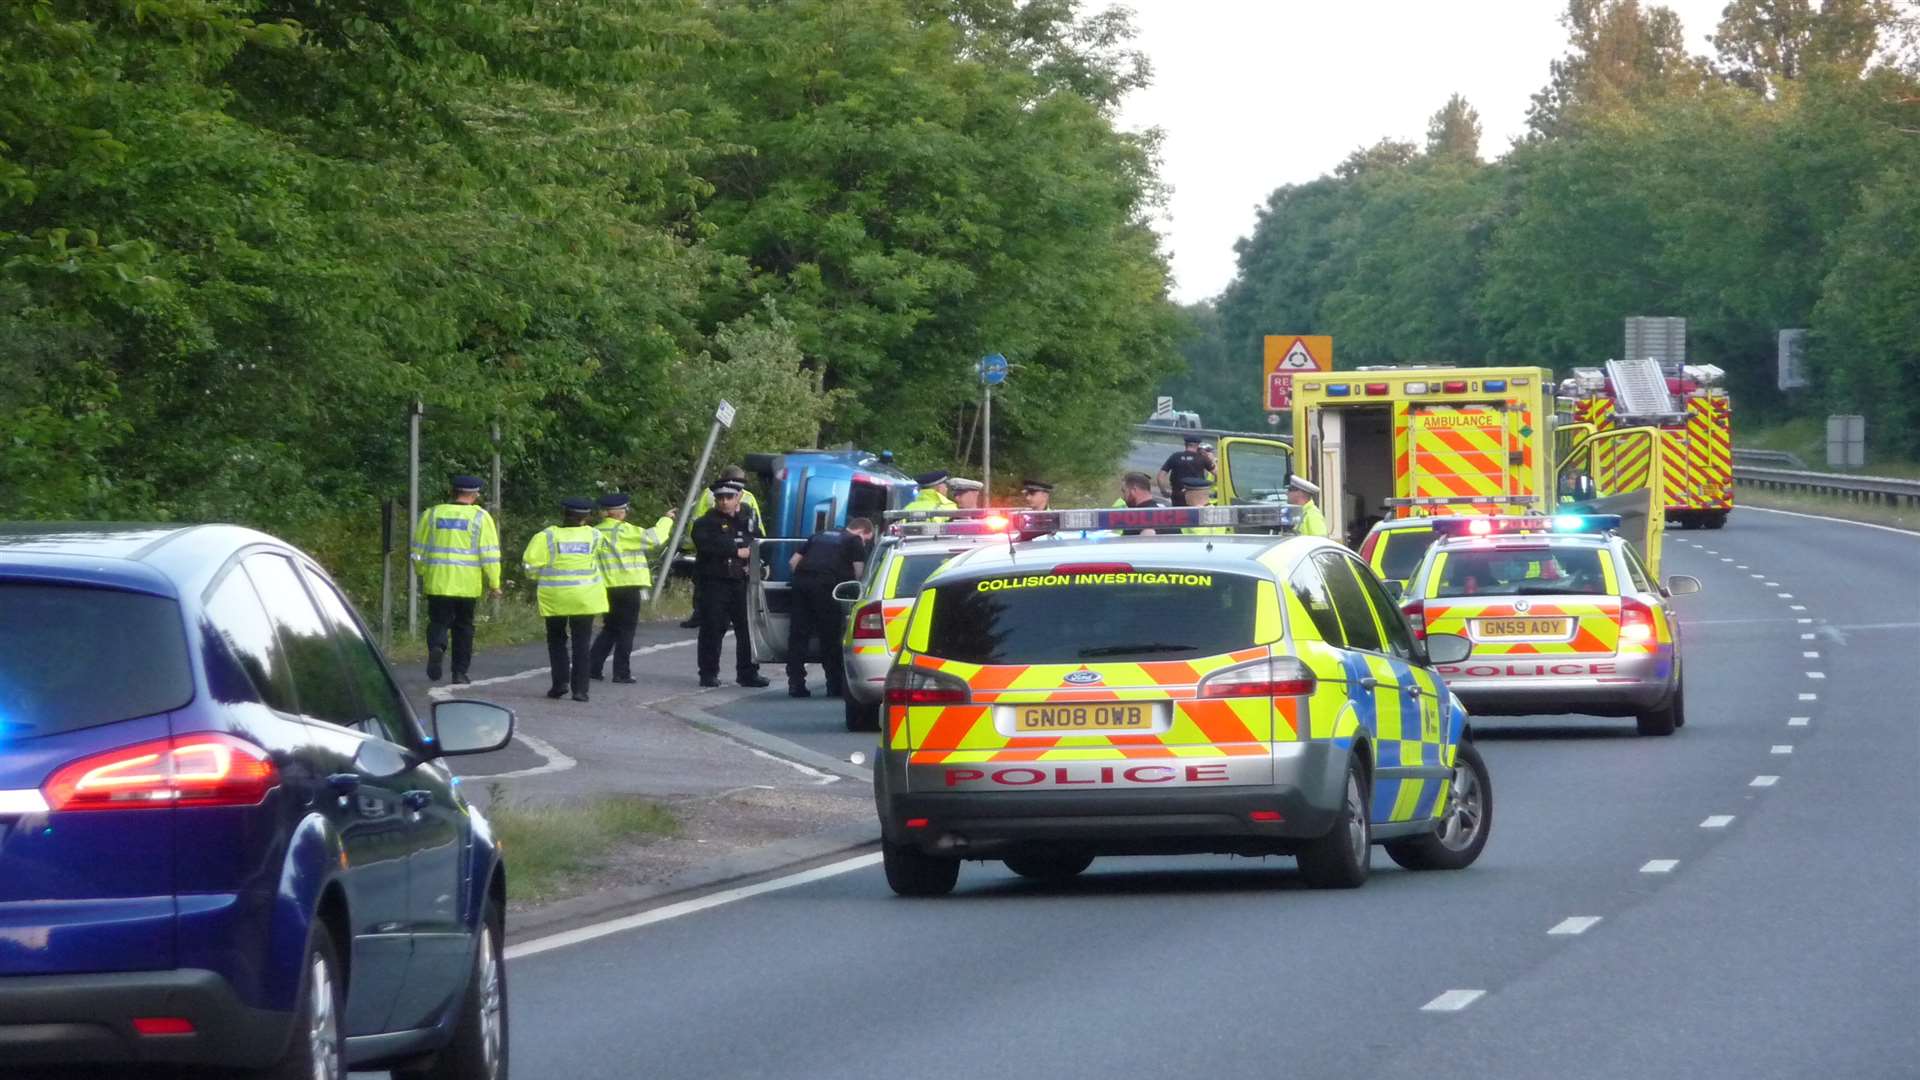 The scene of the crash in Hoath Way, picture by Martin Philbrick